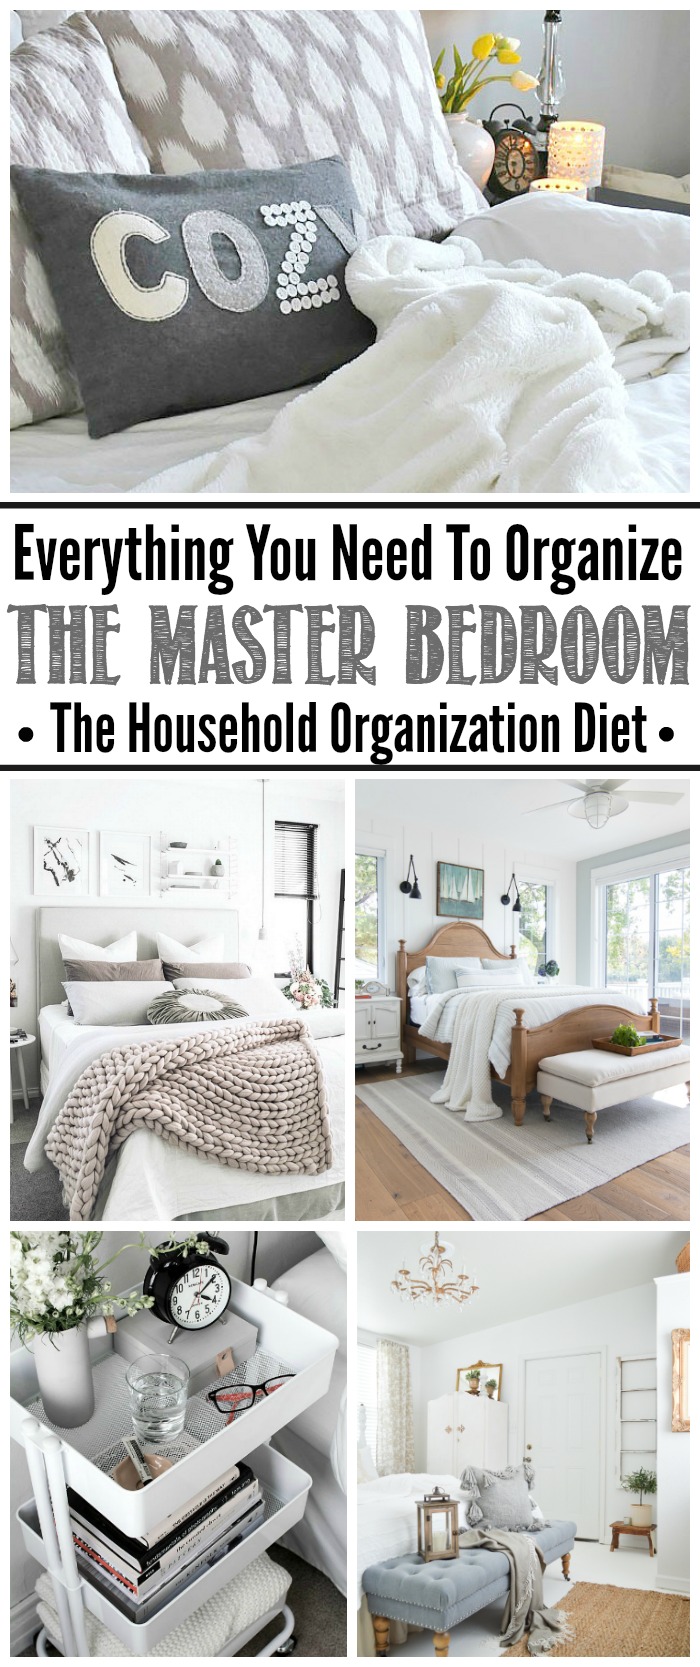 Master Bedroom Organization ideas. Tips, tricks, and tutorials to create an organized and relaxing master bedroom retreat.